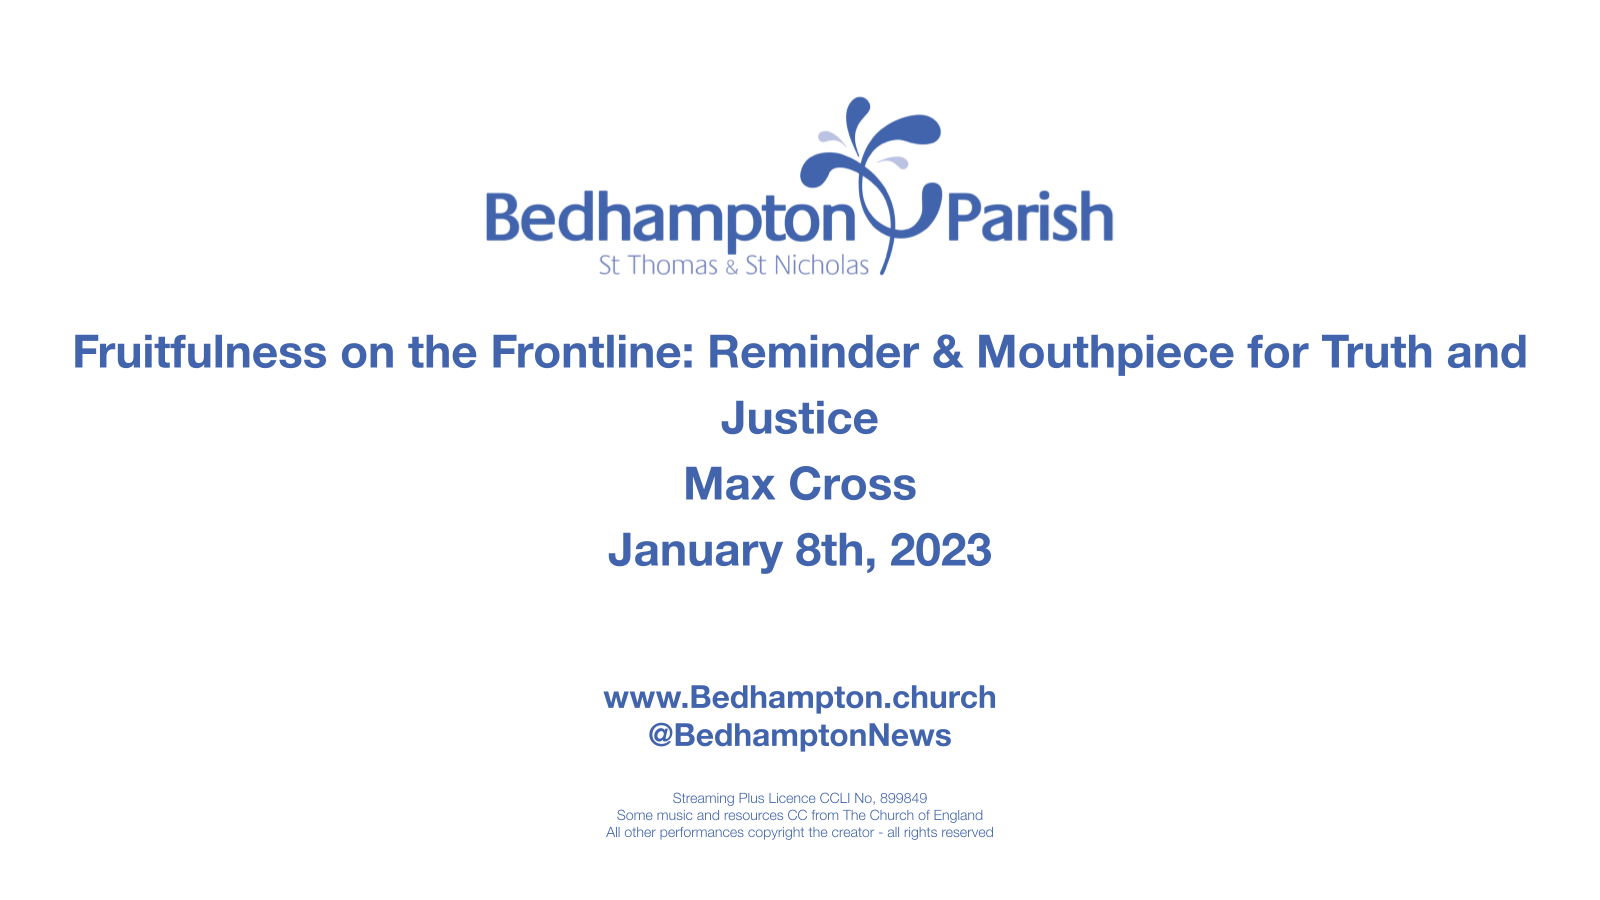 Sermon January 8th, 2023 – Fruitfulness on the Frontline: Mouthpiece for Truth and Justice